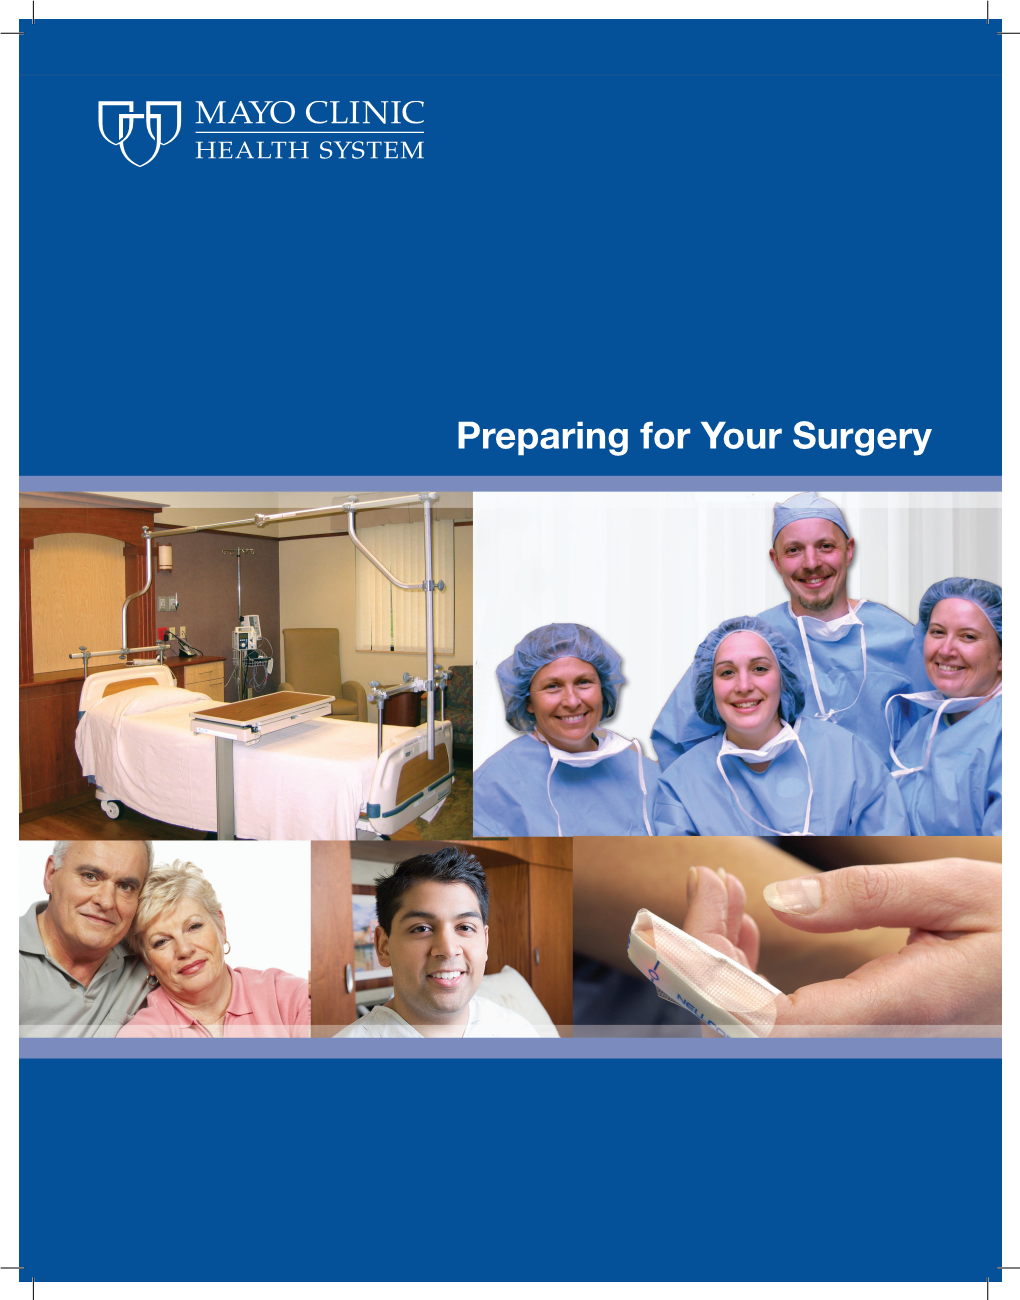 Preparing for Your Surgery Welcome As You Get Ready for Surgery, You May Have a Lot of Questions